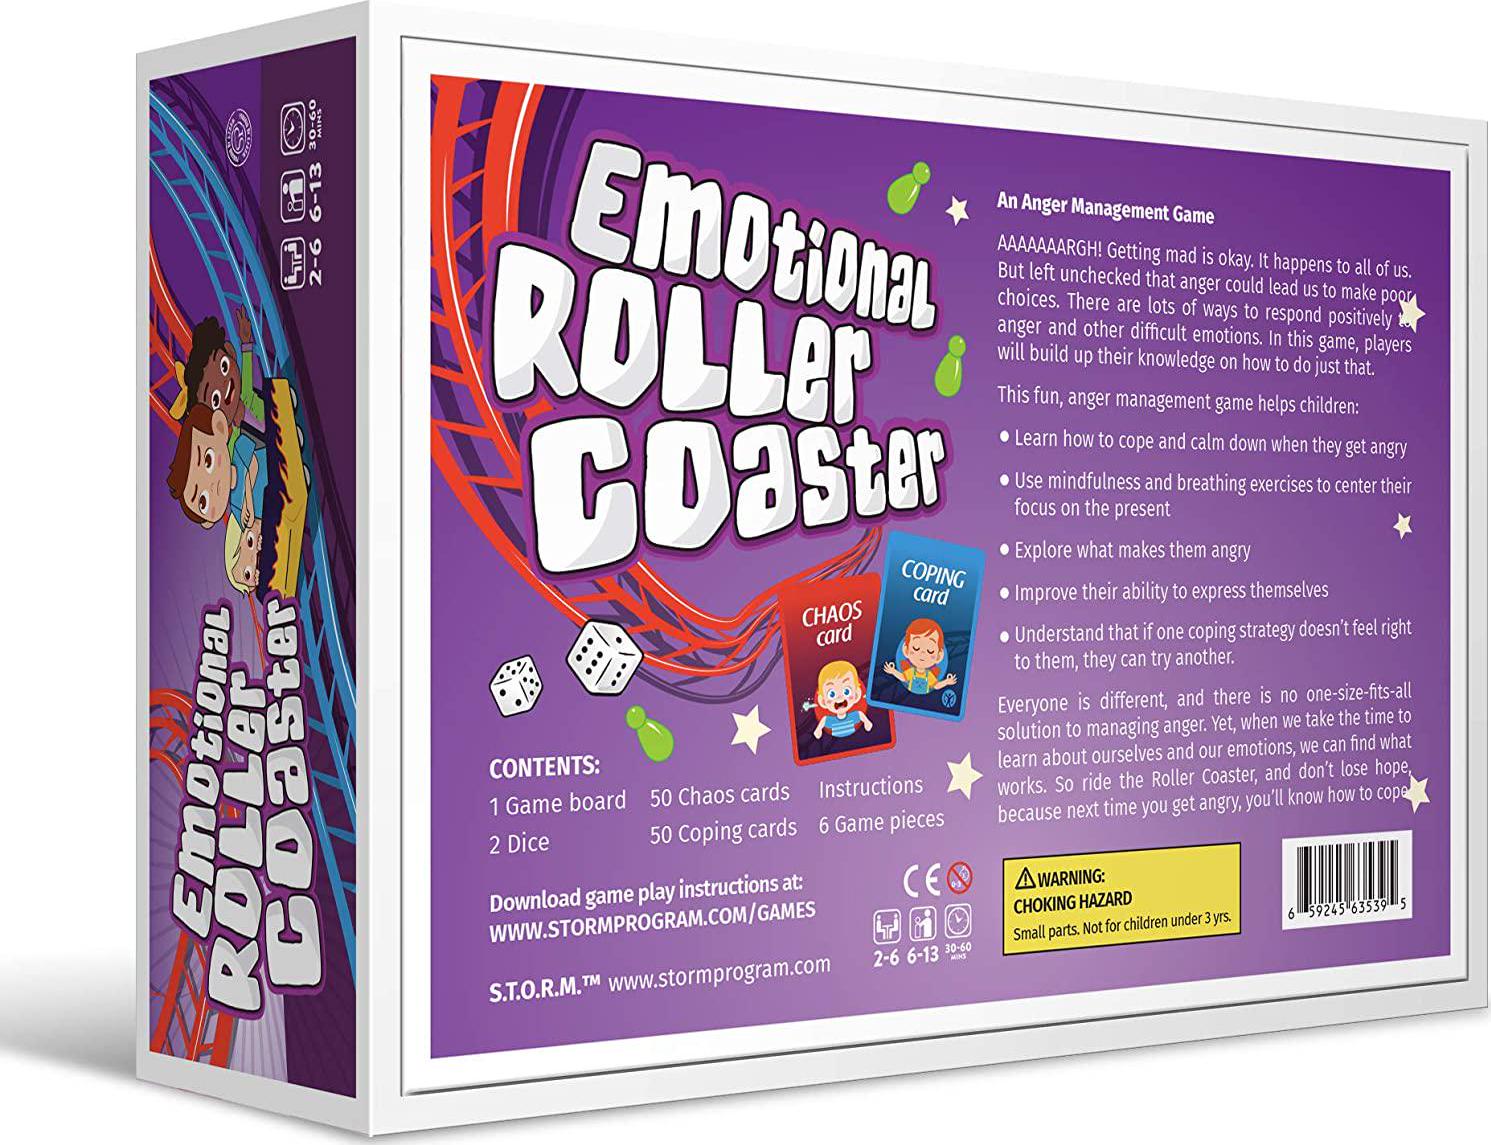 S.T.O.R.M., Emotional Rollercoaster | Anger Management Board Game for Kids and Families | Therapy Learning Resources | Anger Control Card Game | Emotion Board Games Games for Kids Ages 4-8 -12 | Social Emotional